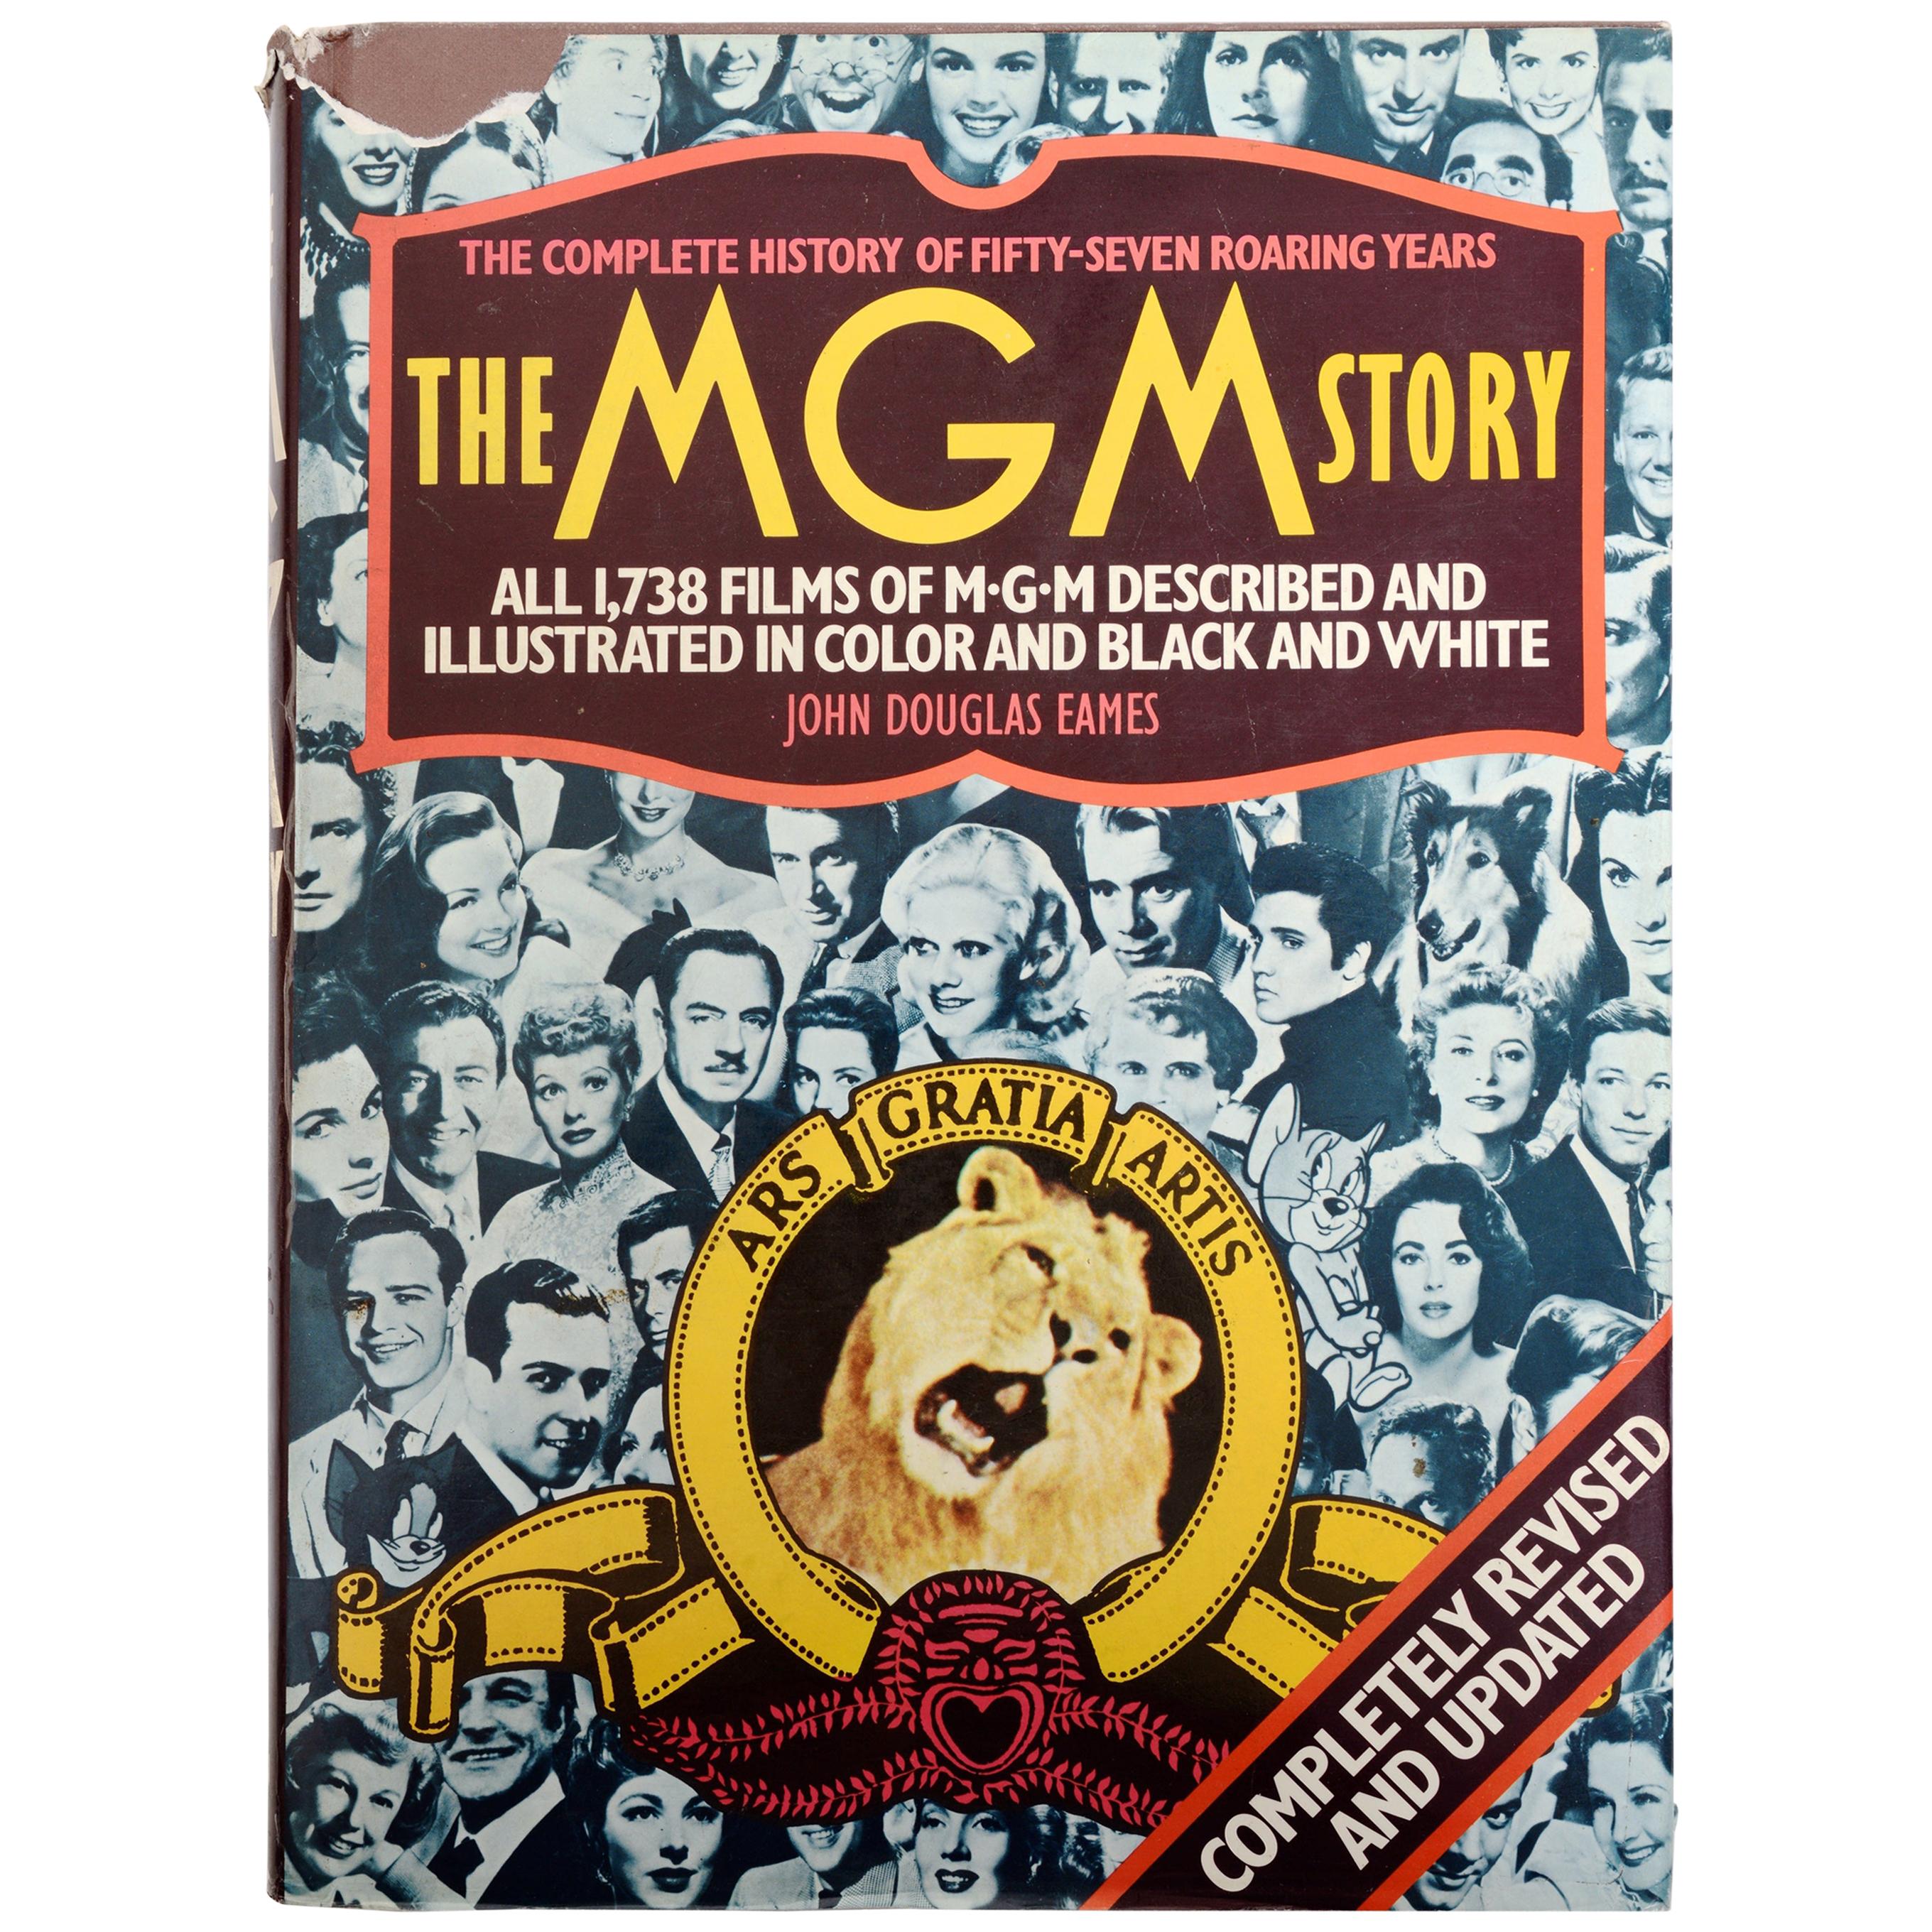 The MGM Story The Complete History of Fifty Roaring Years, by John Eames